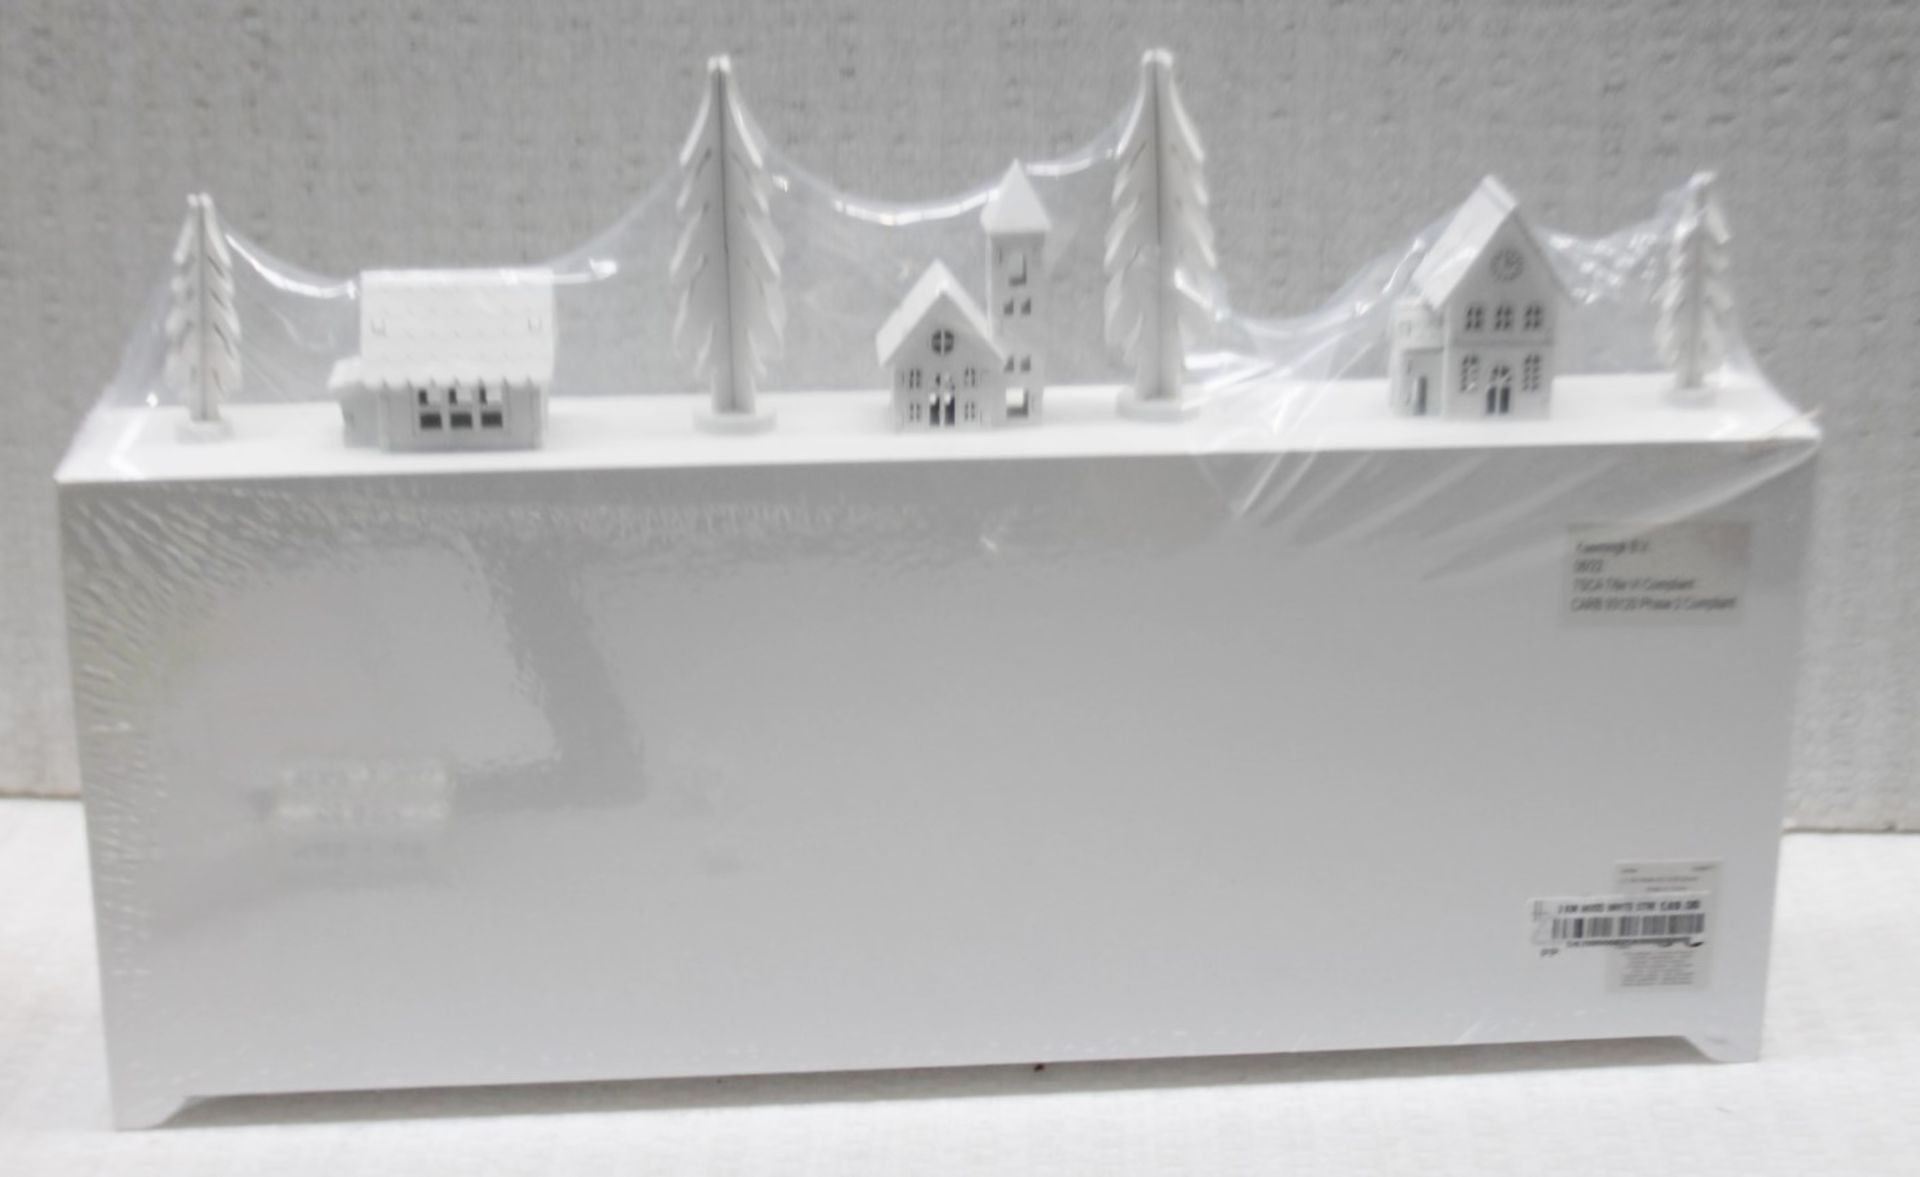 1 x HARRODS OF LONDON Wooden White Street Advent Calendar With Drawers - Ref: 6825630/HAS2164/WH2- - Image 5 of 5